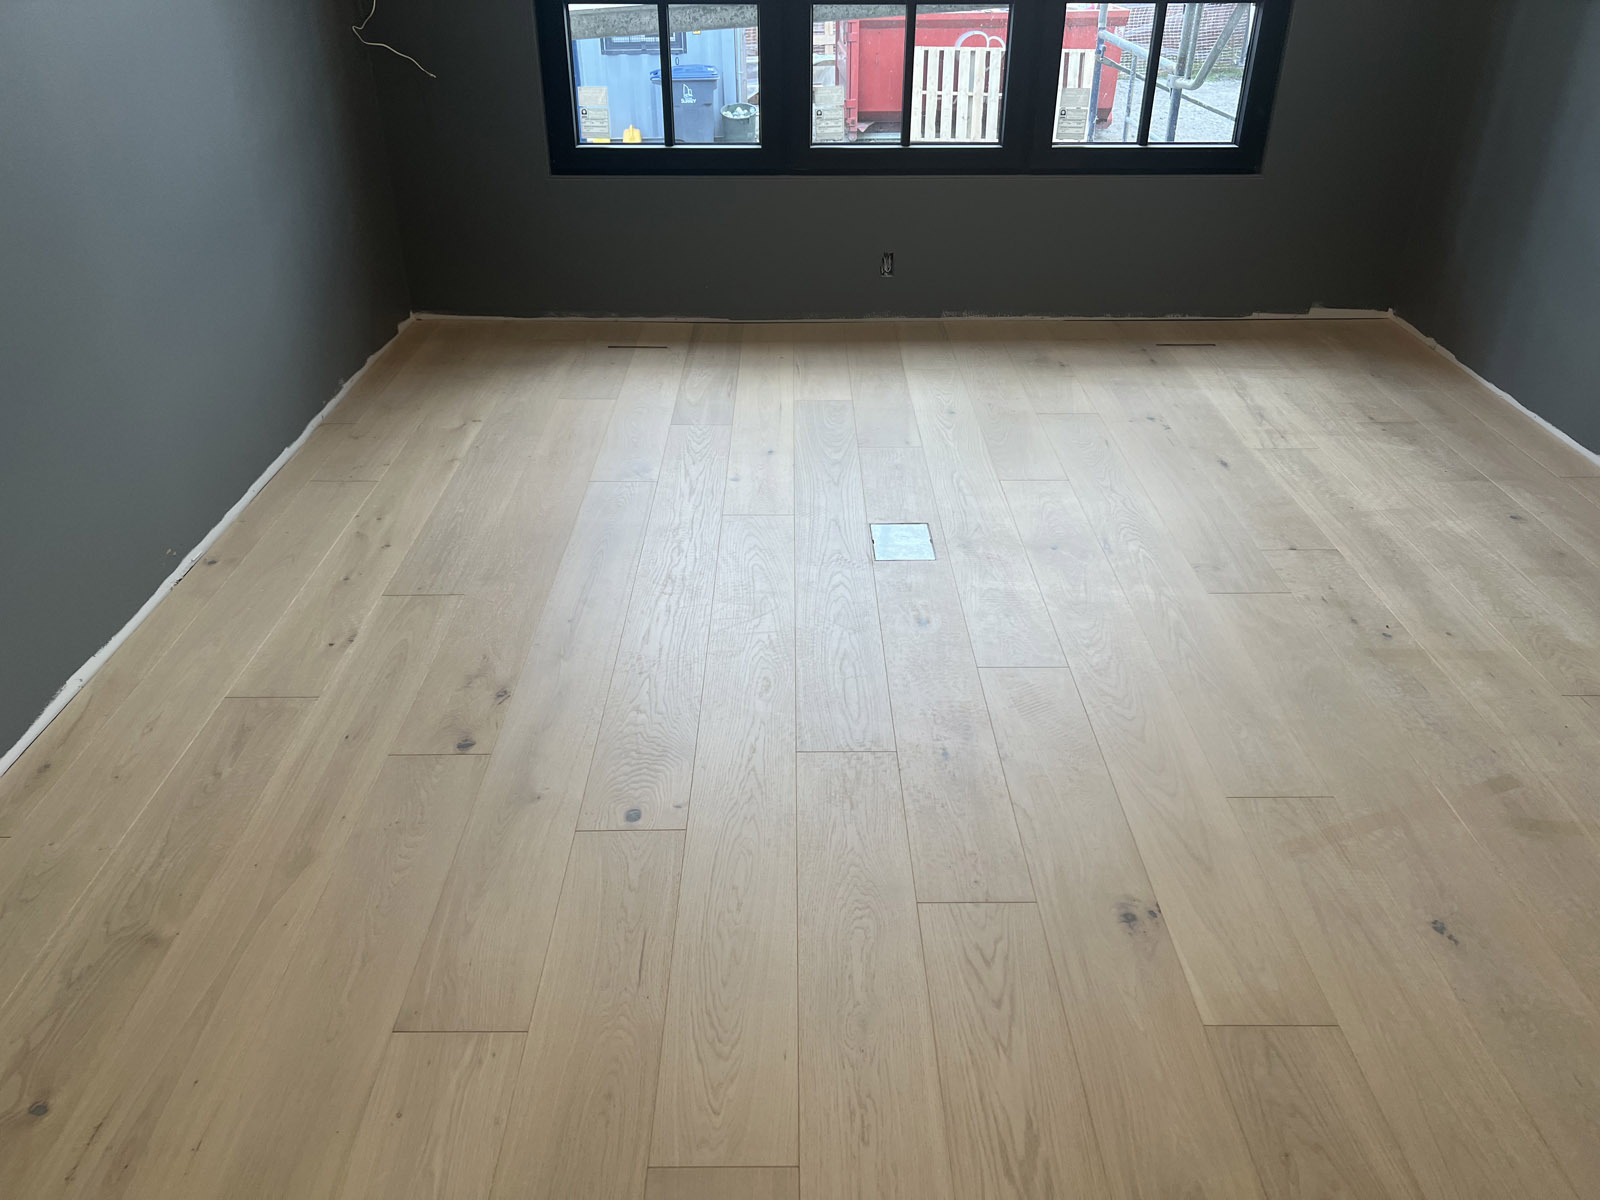 Perfectly laid wooden flooring on a sub floor